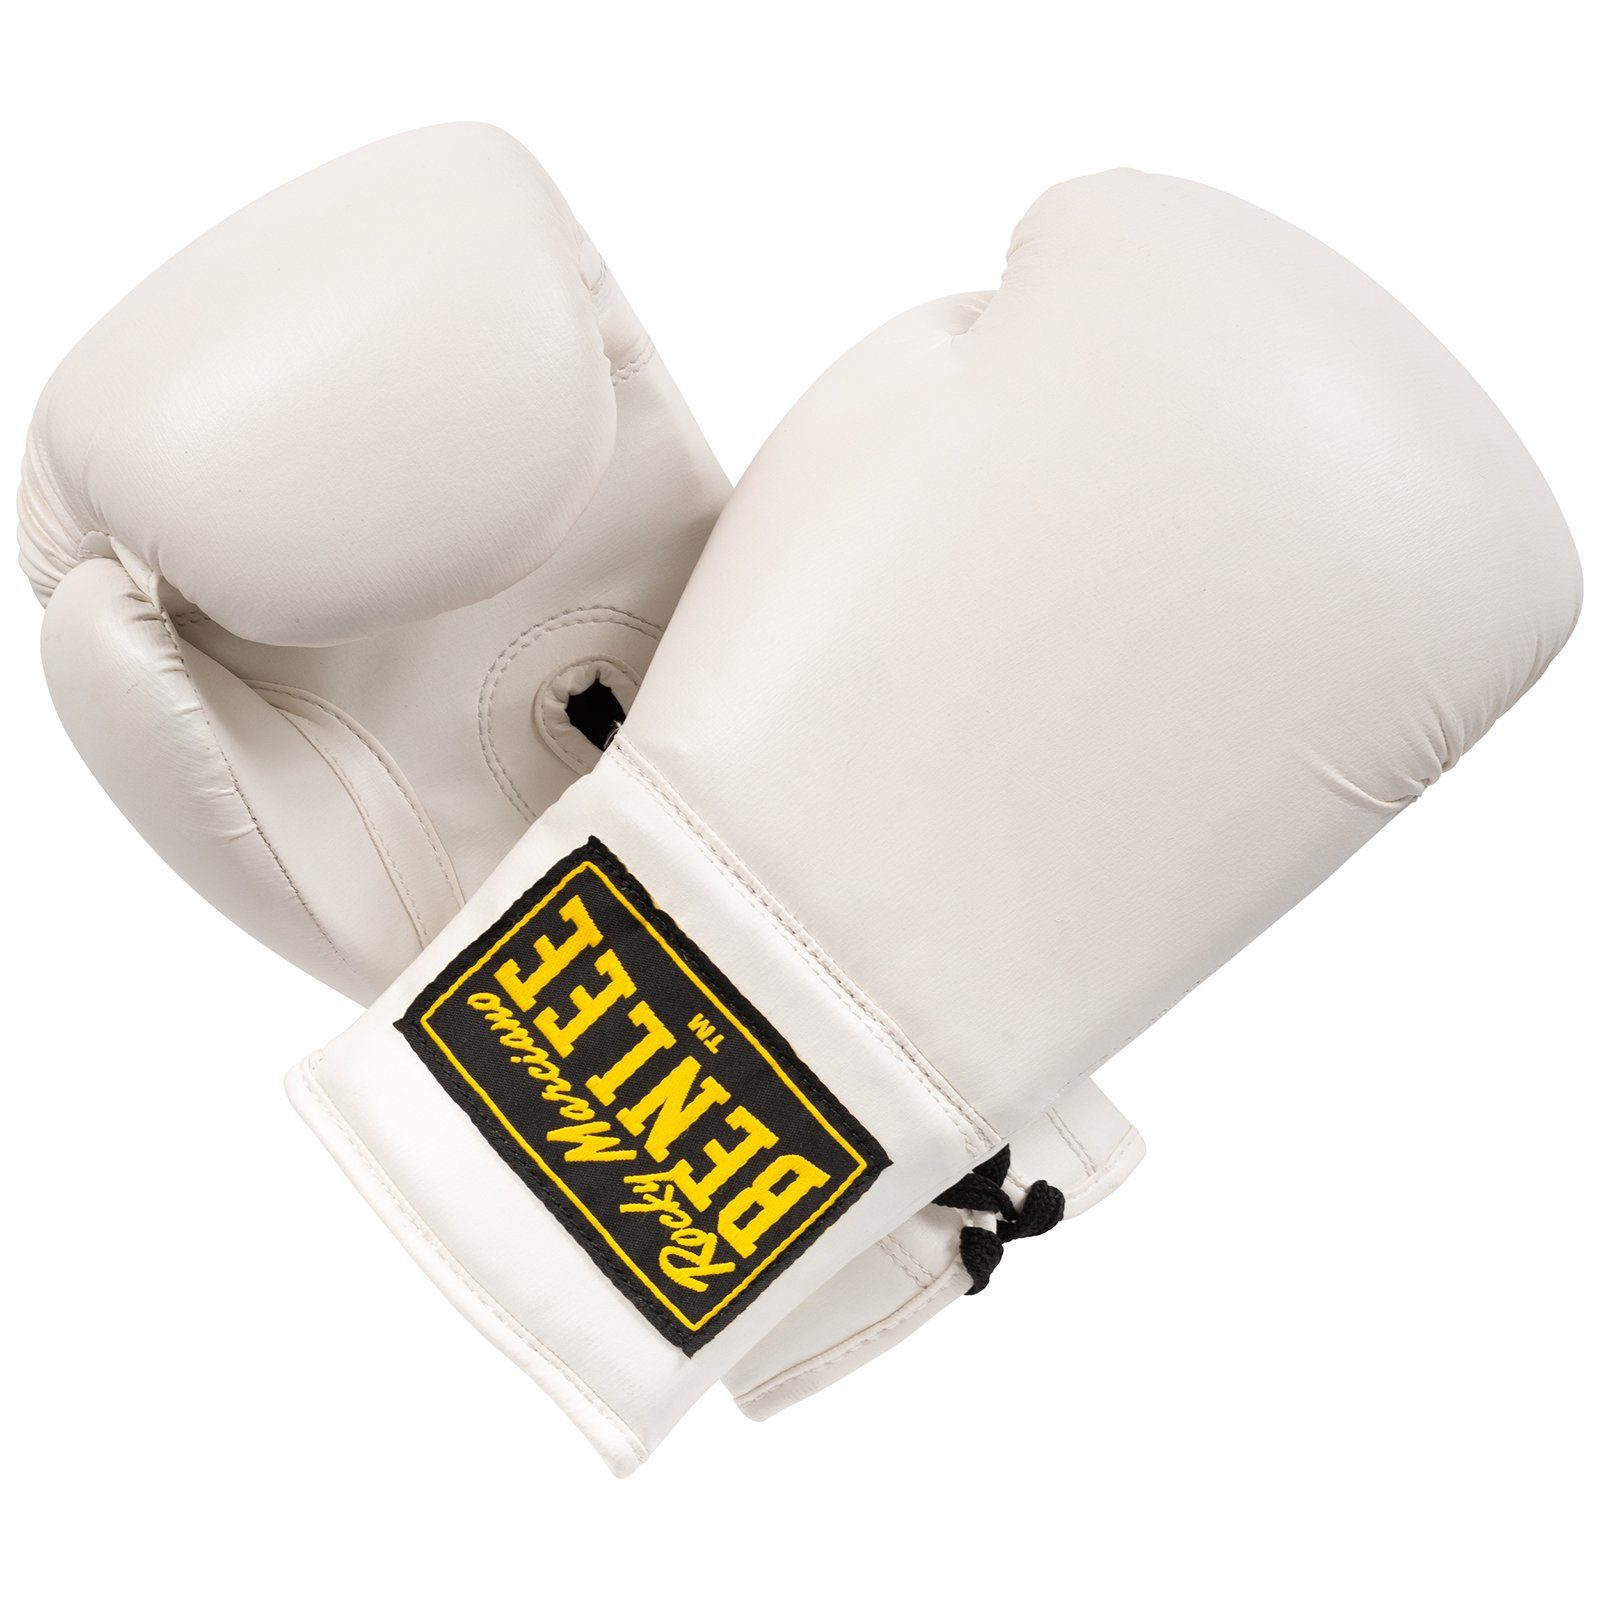 Benlee Rocky Marciano White AUTOGRAPH GLOVES Boxhandschuhe